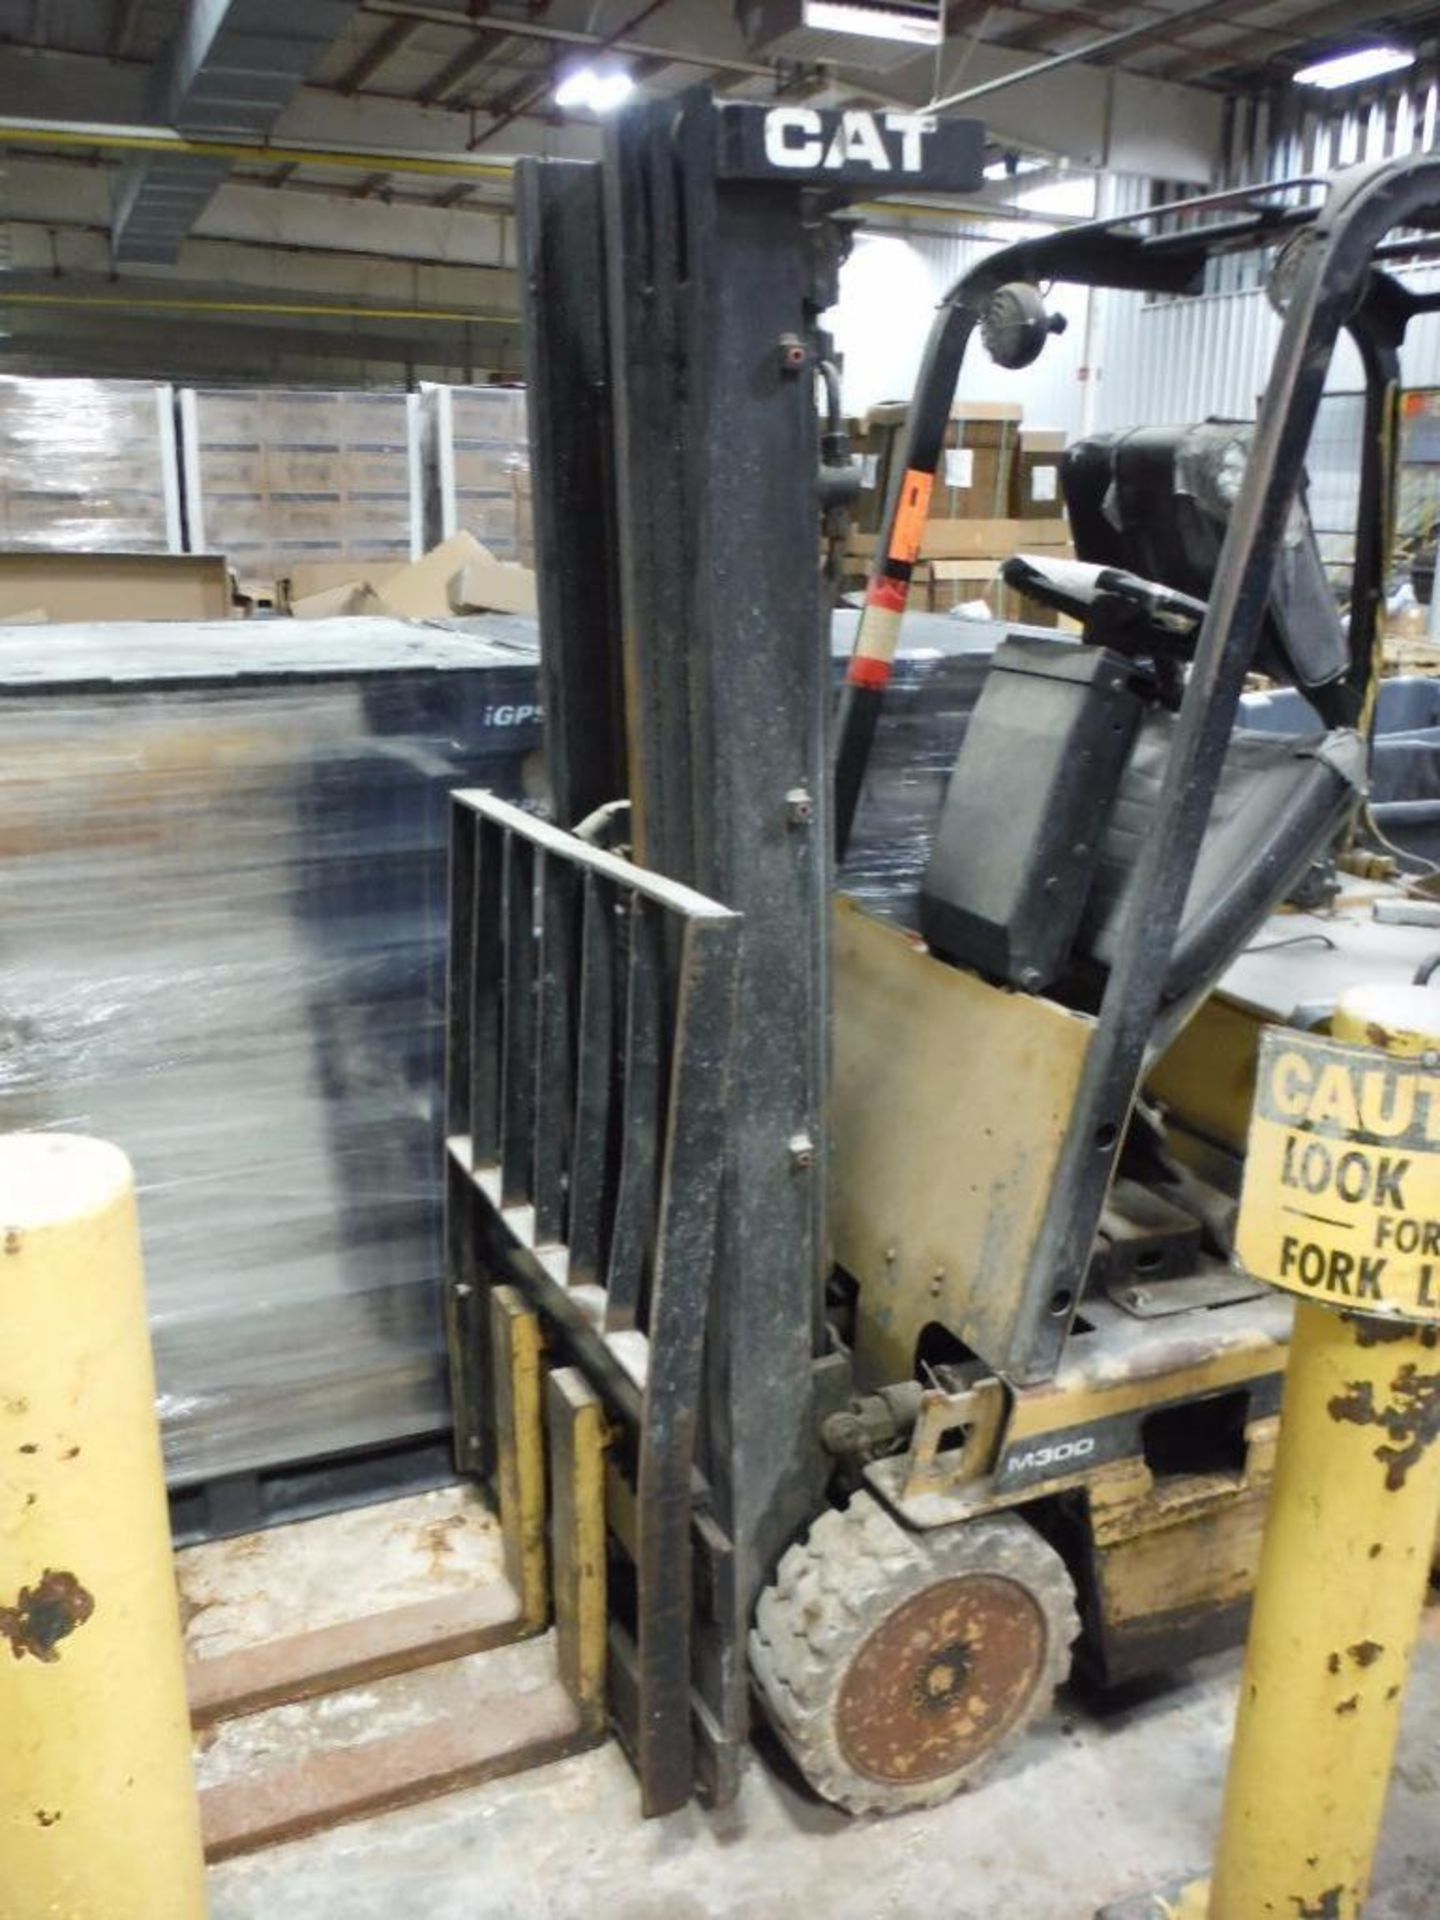 Caterpillar forklift, Model 30D, 36V, 3000 lb max capacity, Machine ID 970151, 5965 hours, needs new - Image 10 of 11